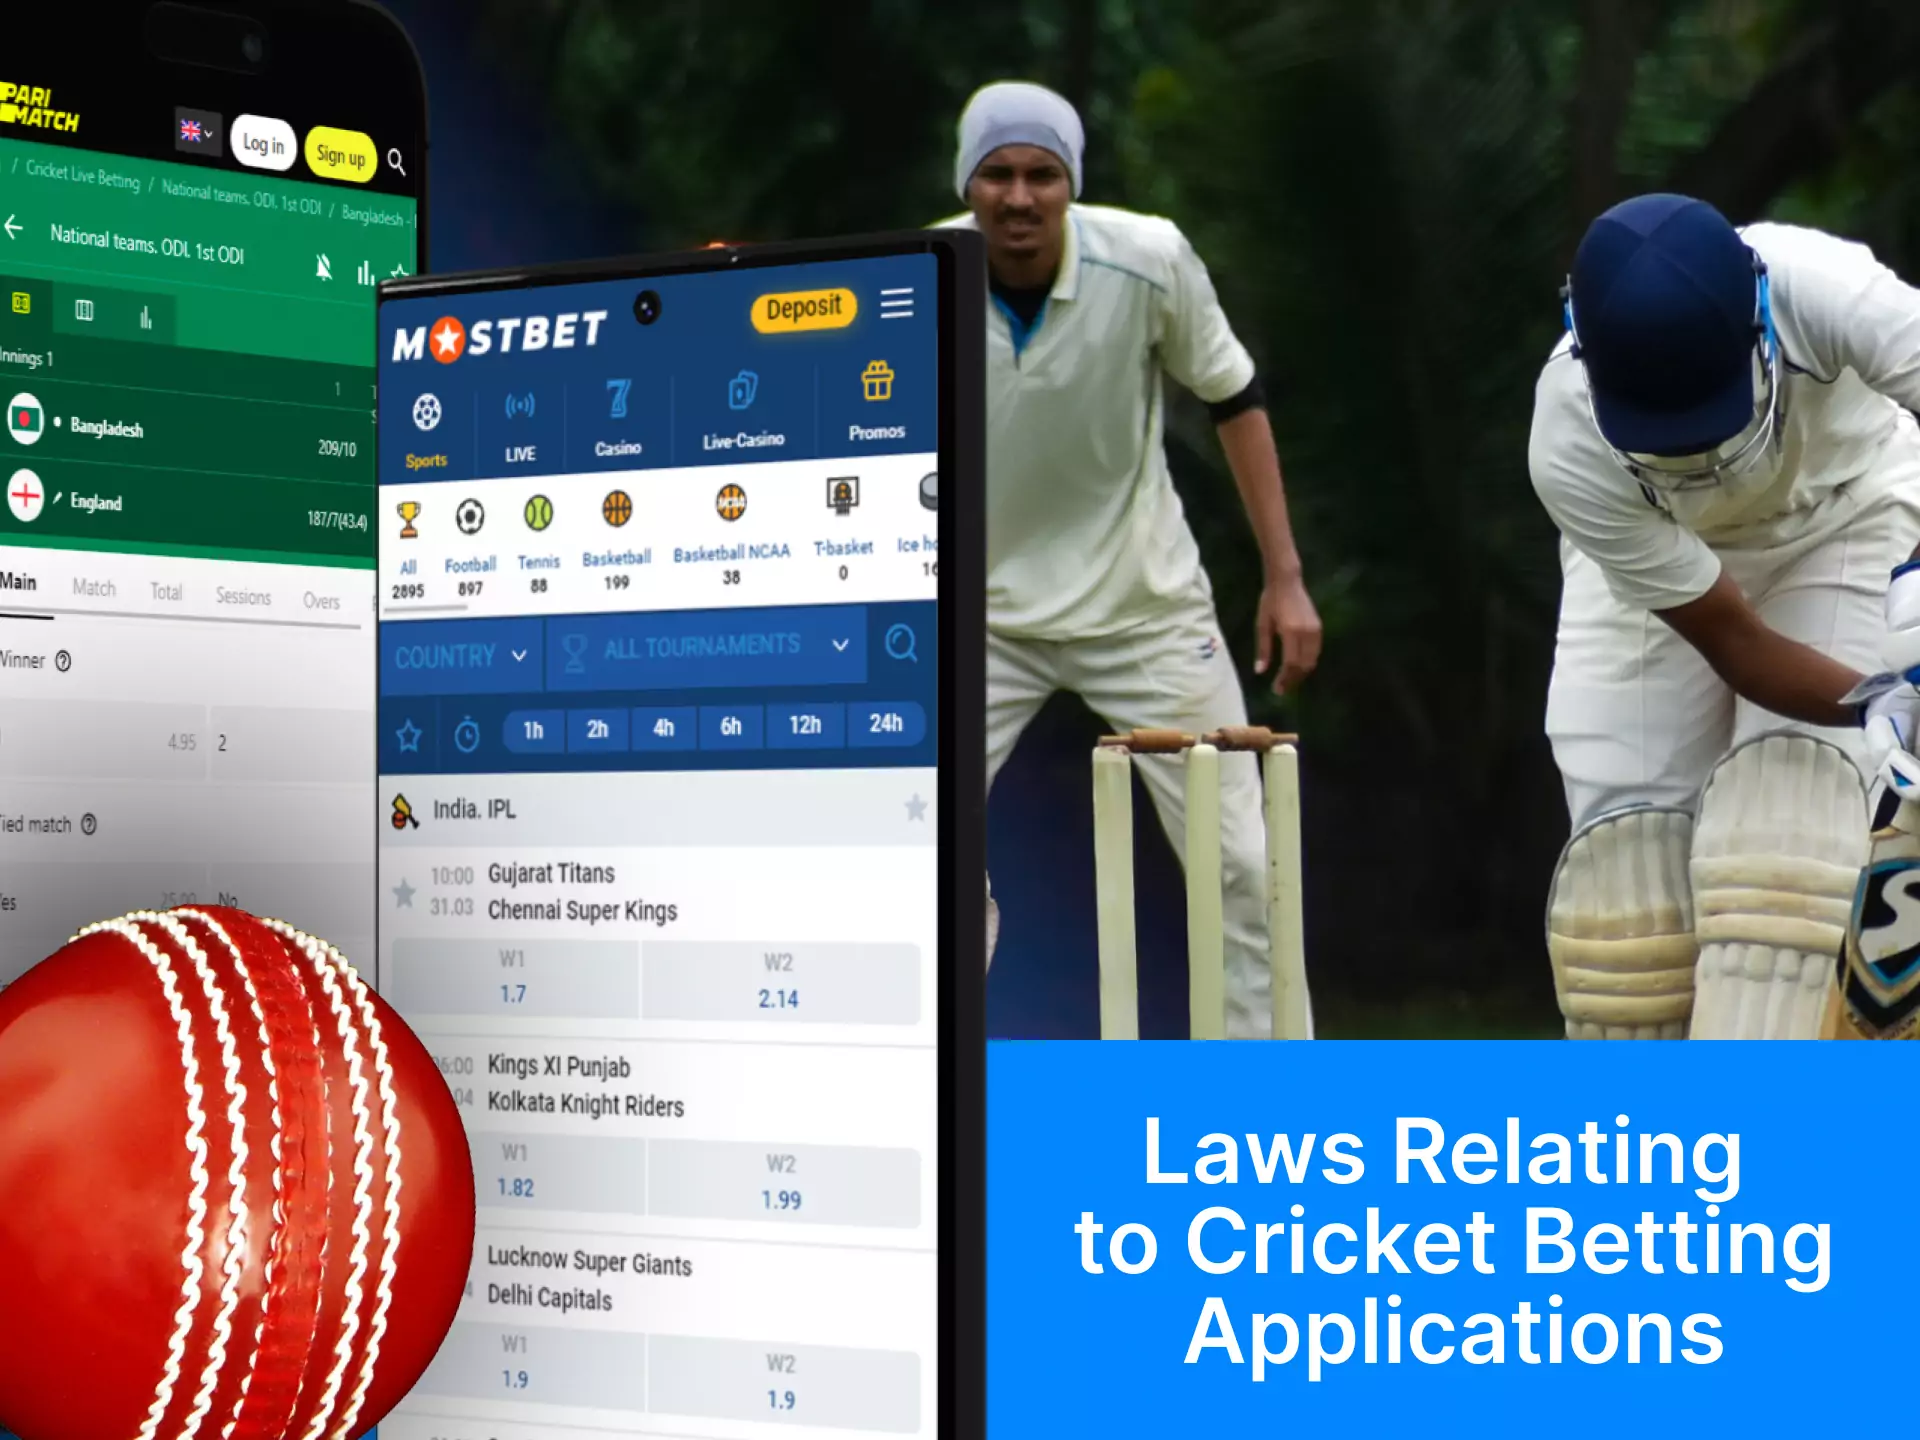 You can legally use apps for betting on cricket.